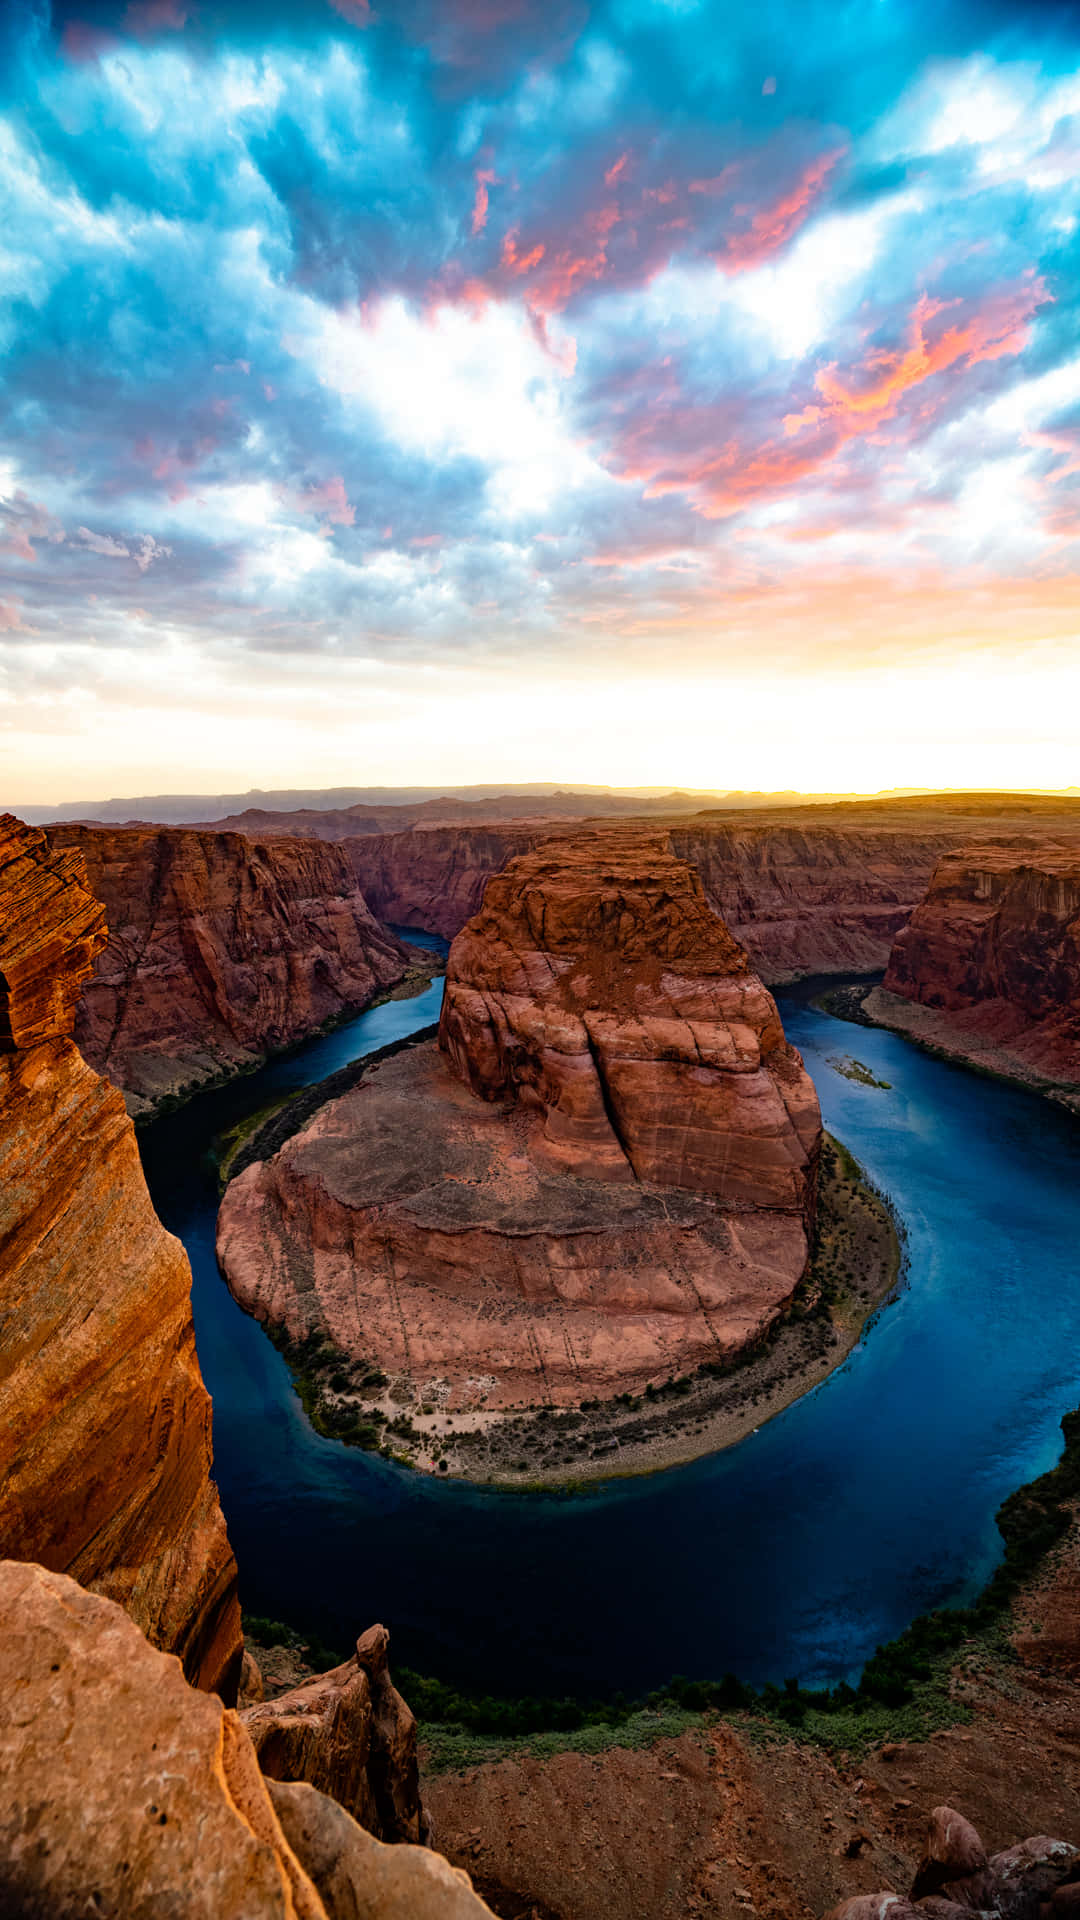 A Sunset Over The River In Horseshoe Canyon Background